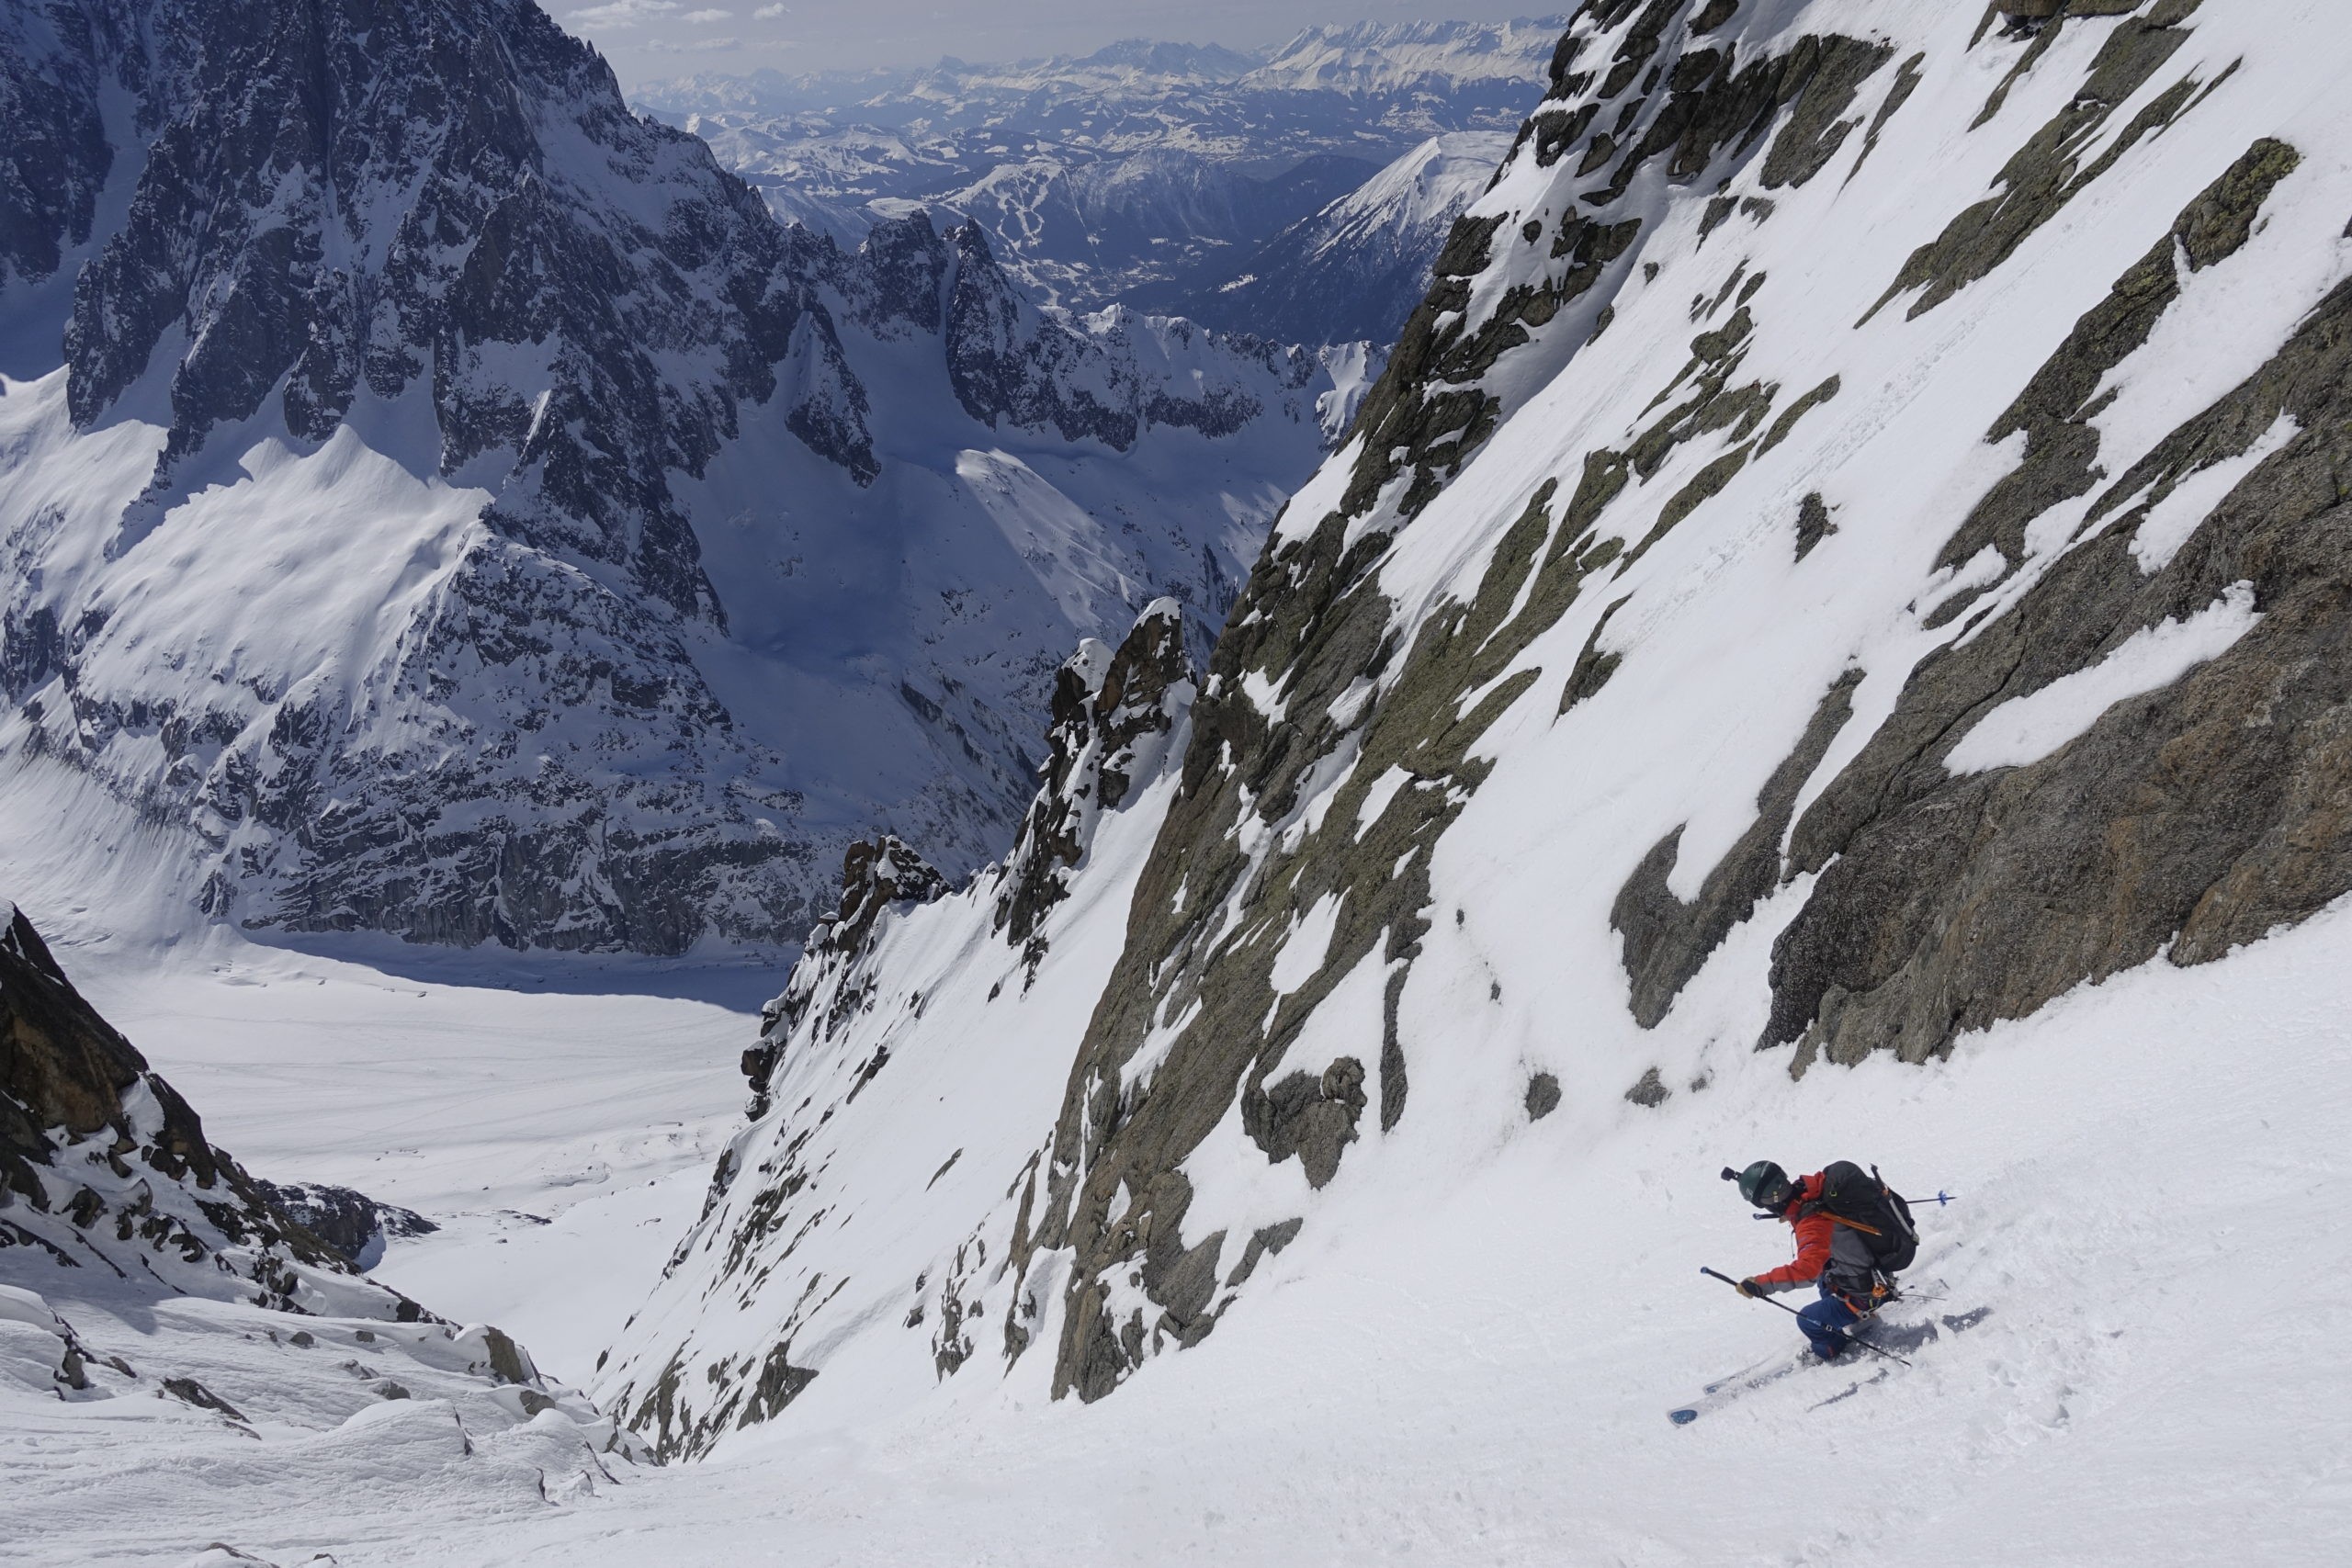 Technical steep skiing in the Alps